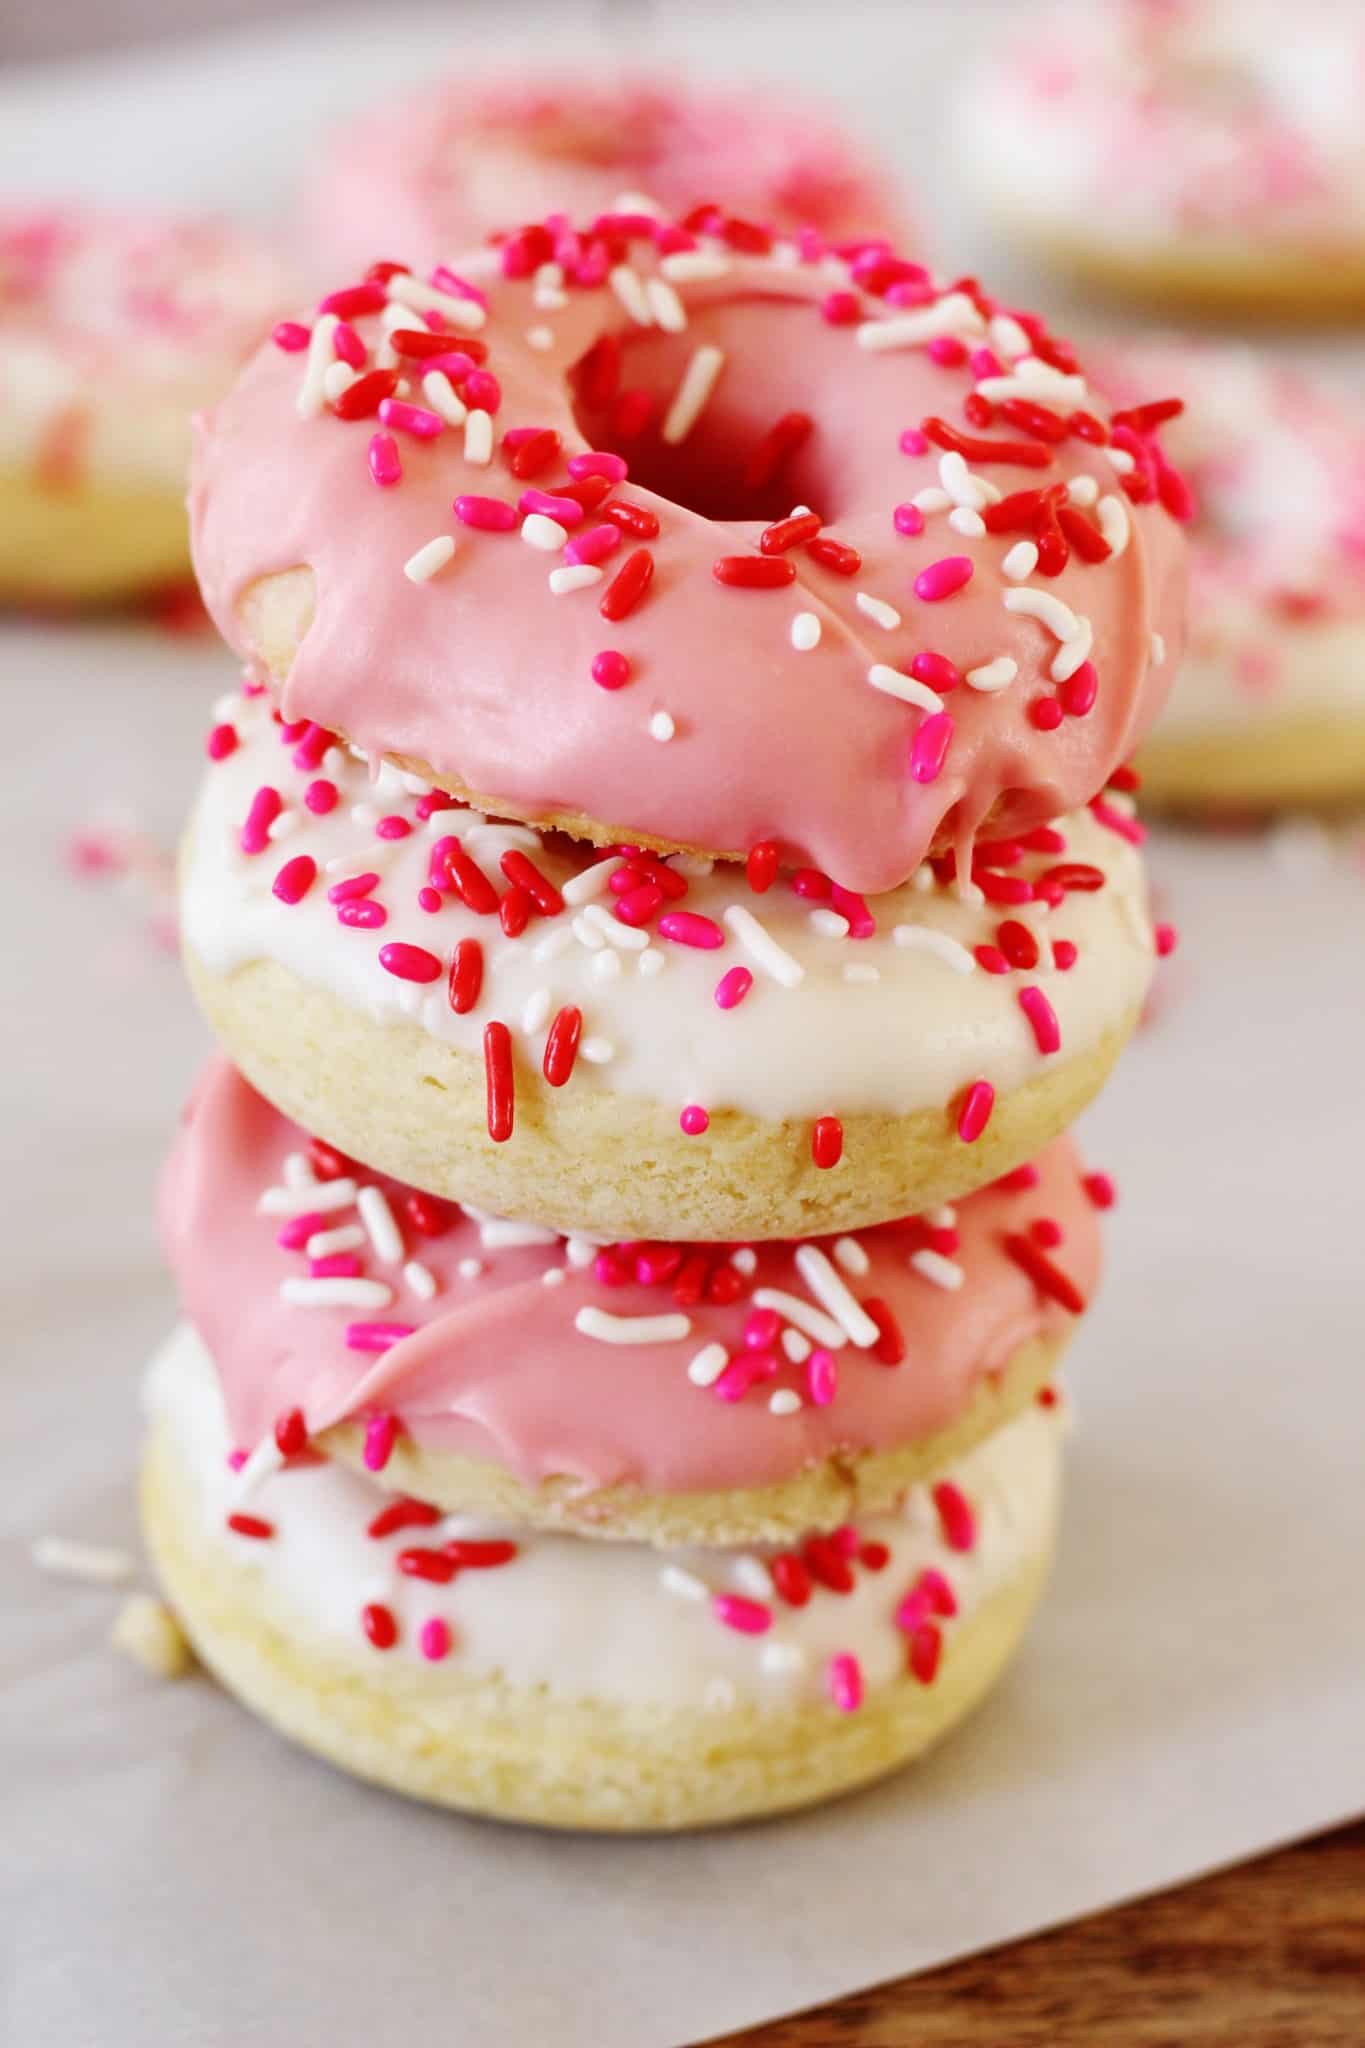 This delicious donuts recipe uses candy melts instead of frosting for the ultimate sweetness. Add Valentine's Day sprinkles or customize for any holiday!